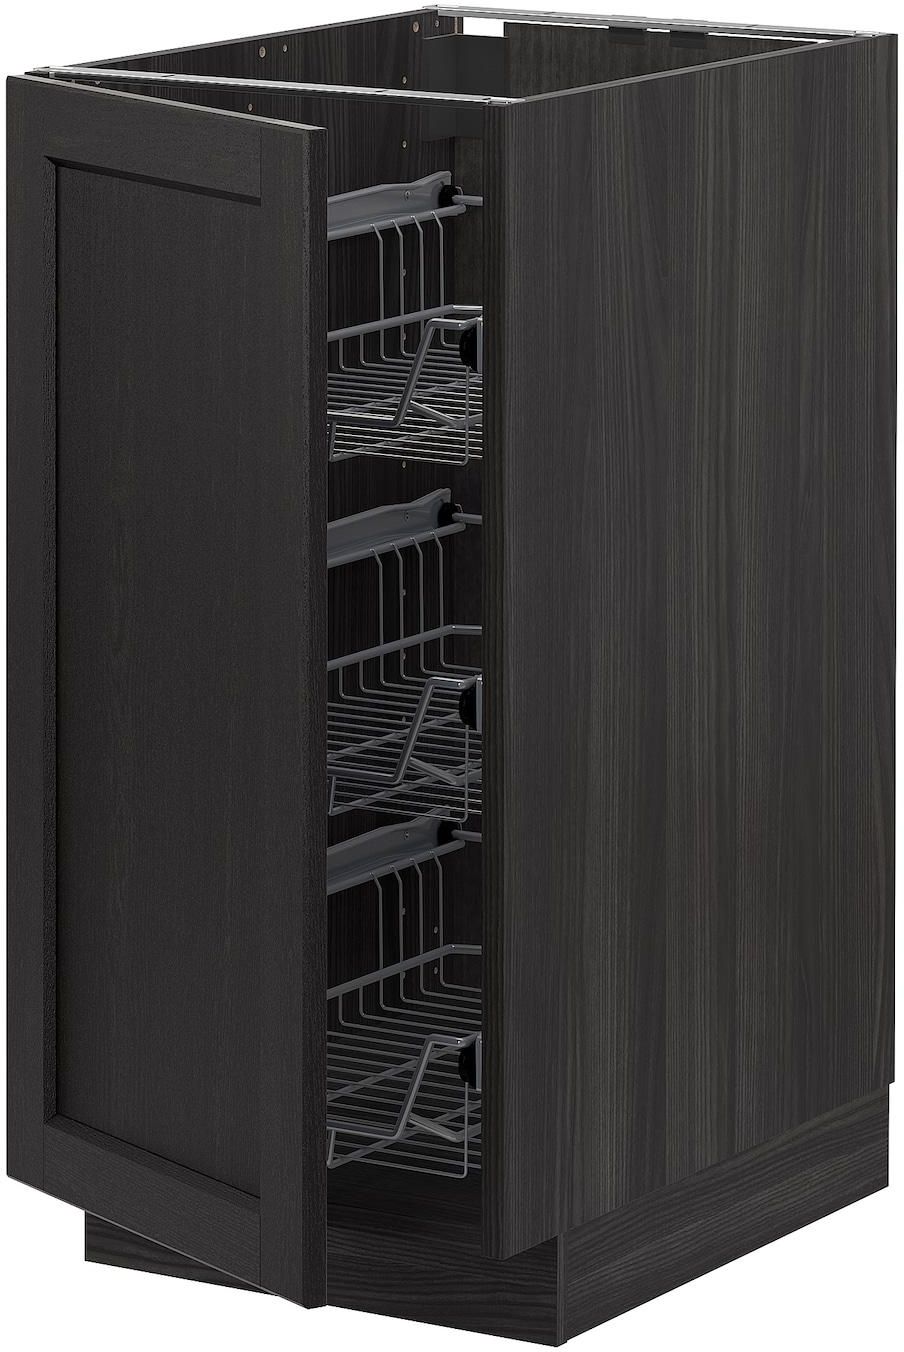 METOD Base cabinet with wire baskets - black/Lerhyttan black stained 40x60 cm